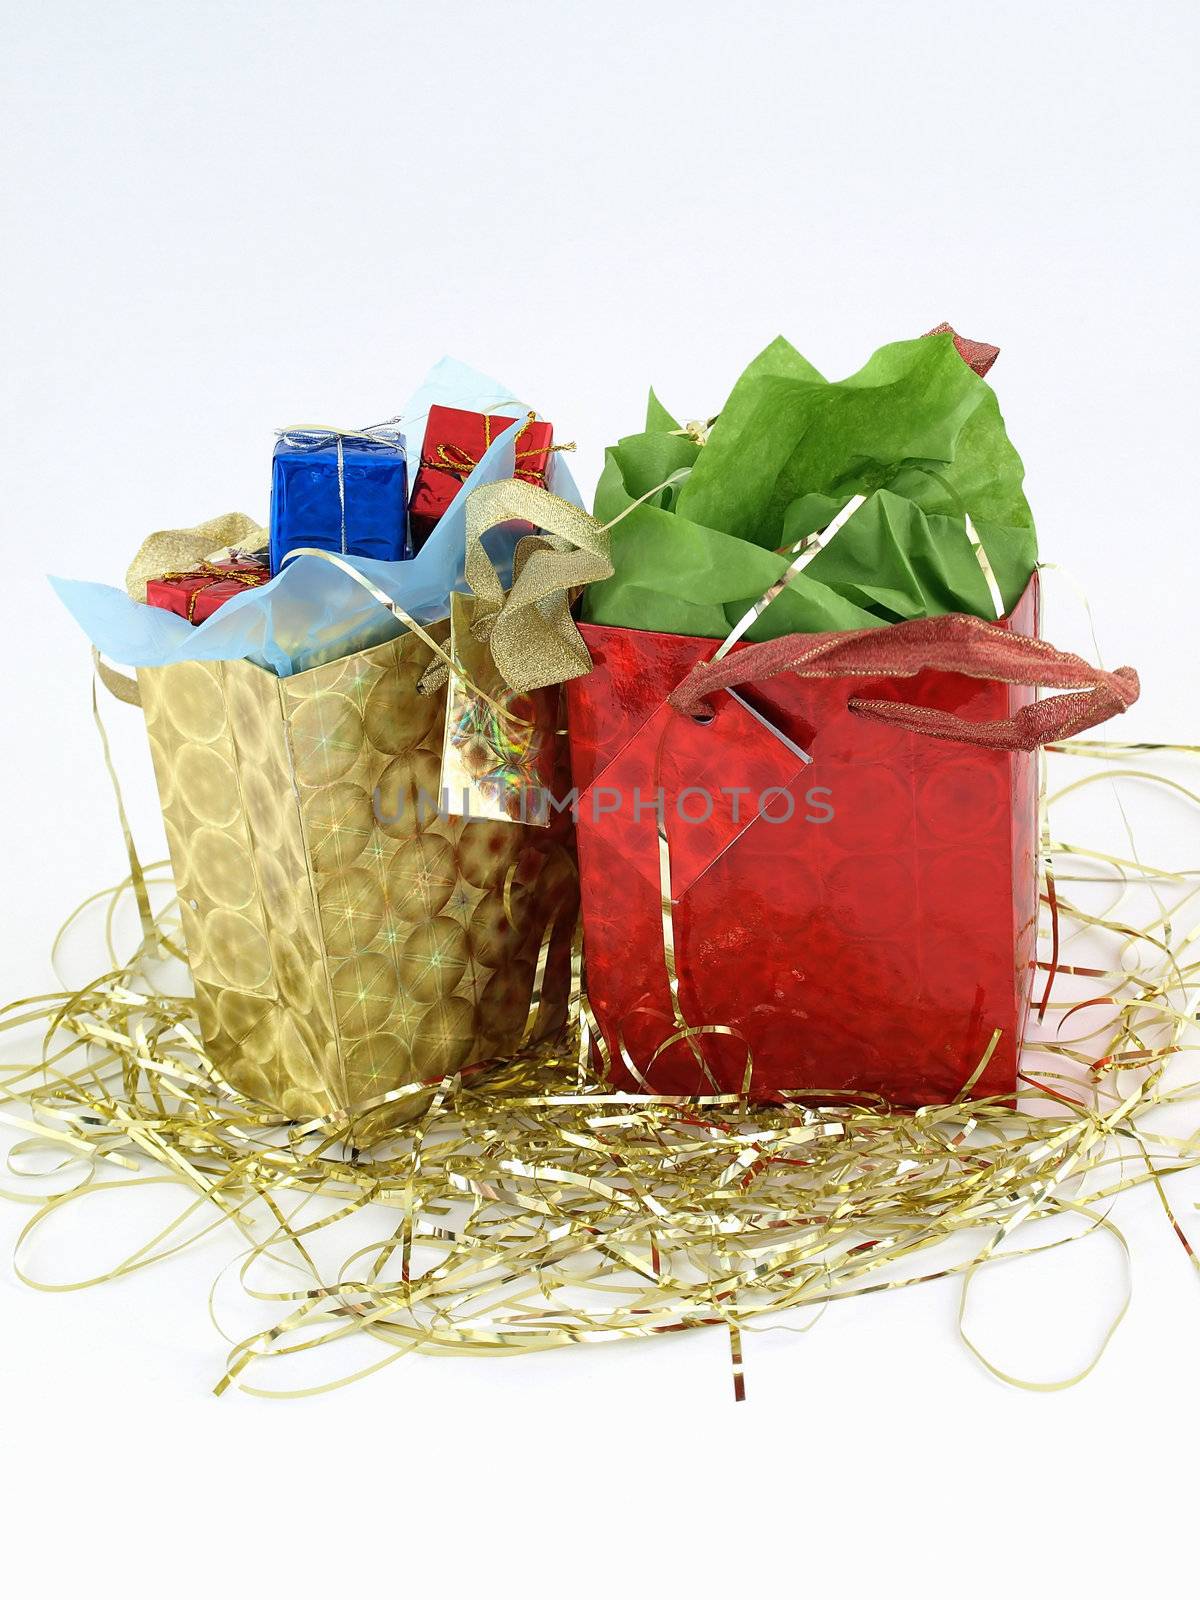 Two foiled gift bags full of wrapped presents. On a bed of gold tinsel over a white background.